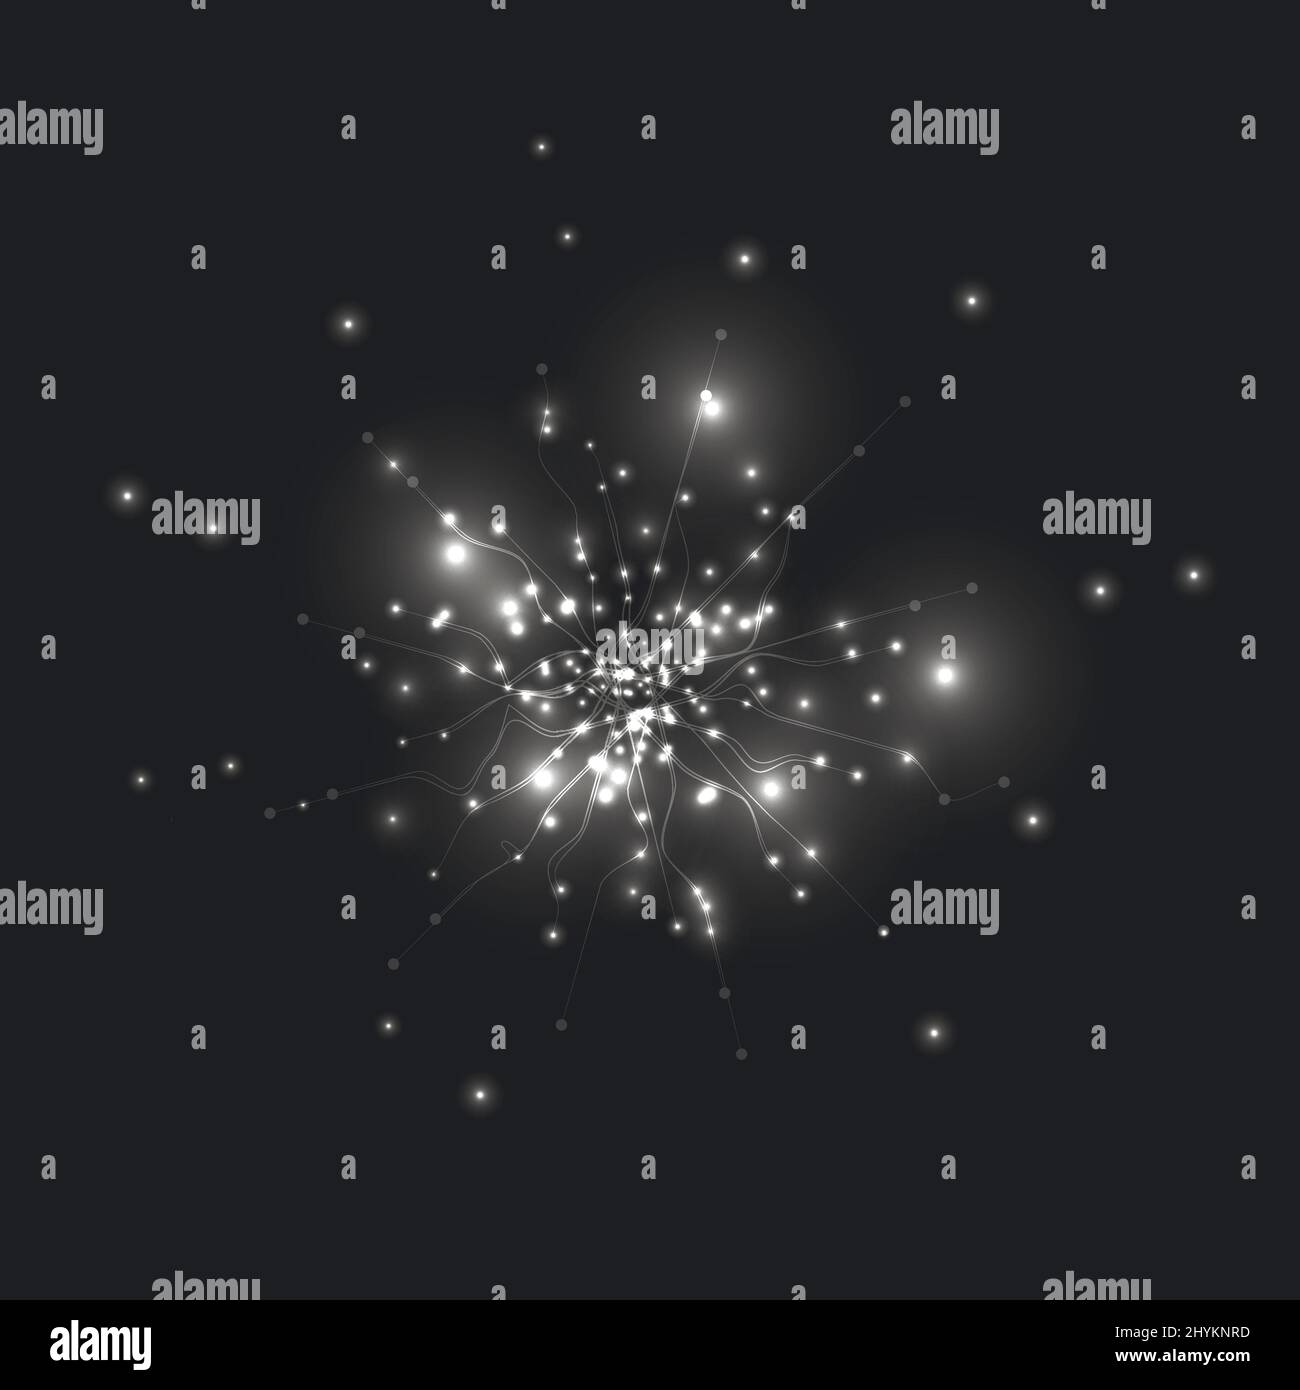 Space background with bright stars. Vector galaxy illustration Stock Vector